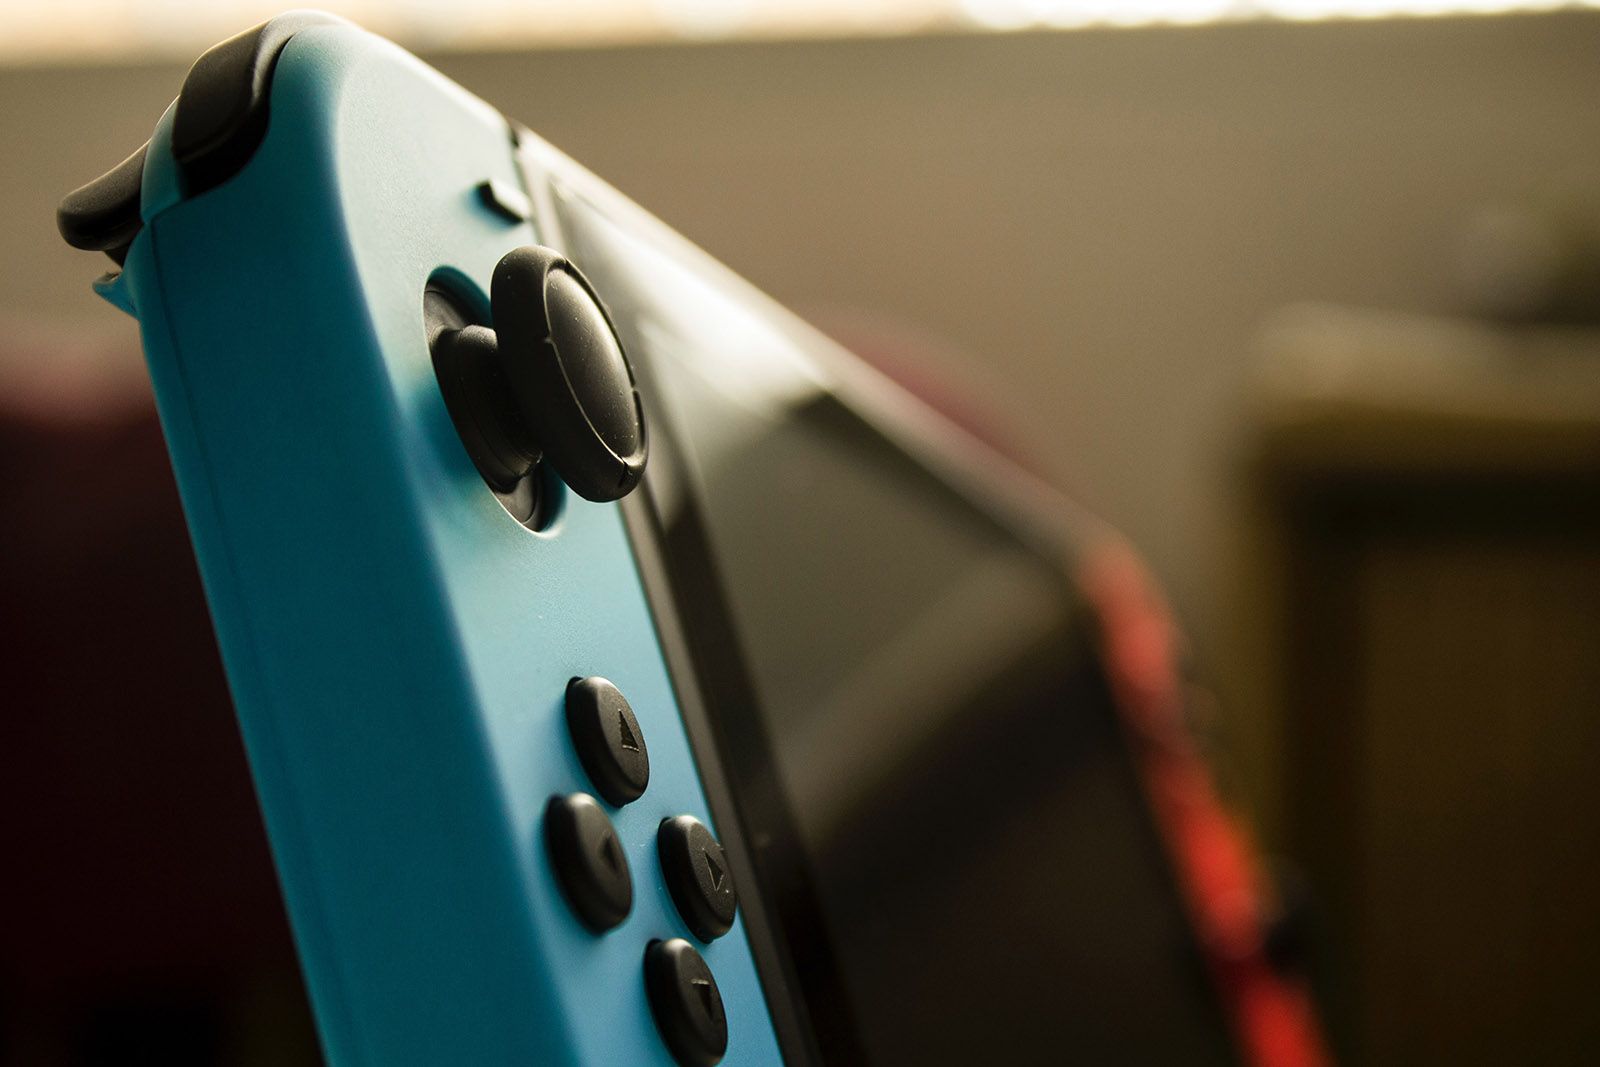 Nintendo Switch 2: Specs, design, rumours and features